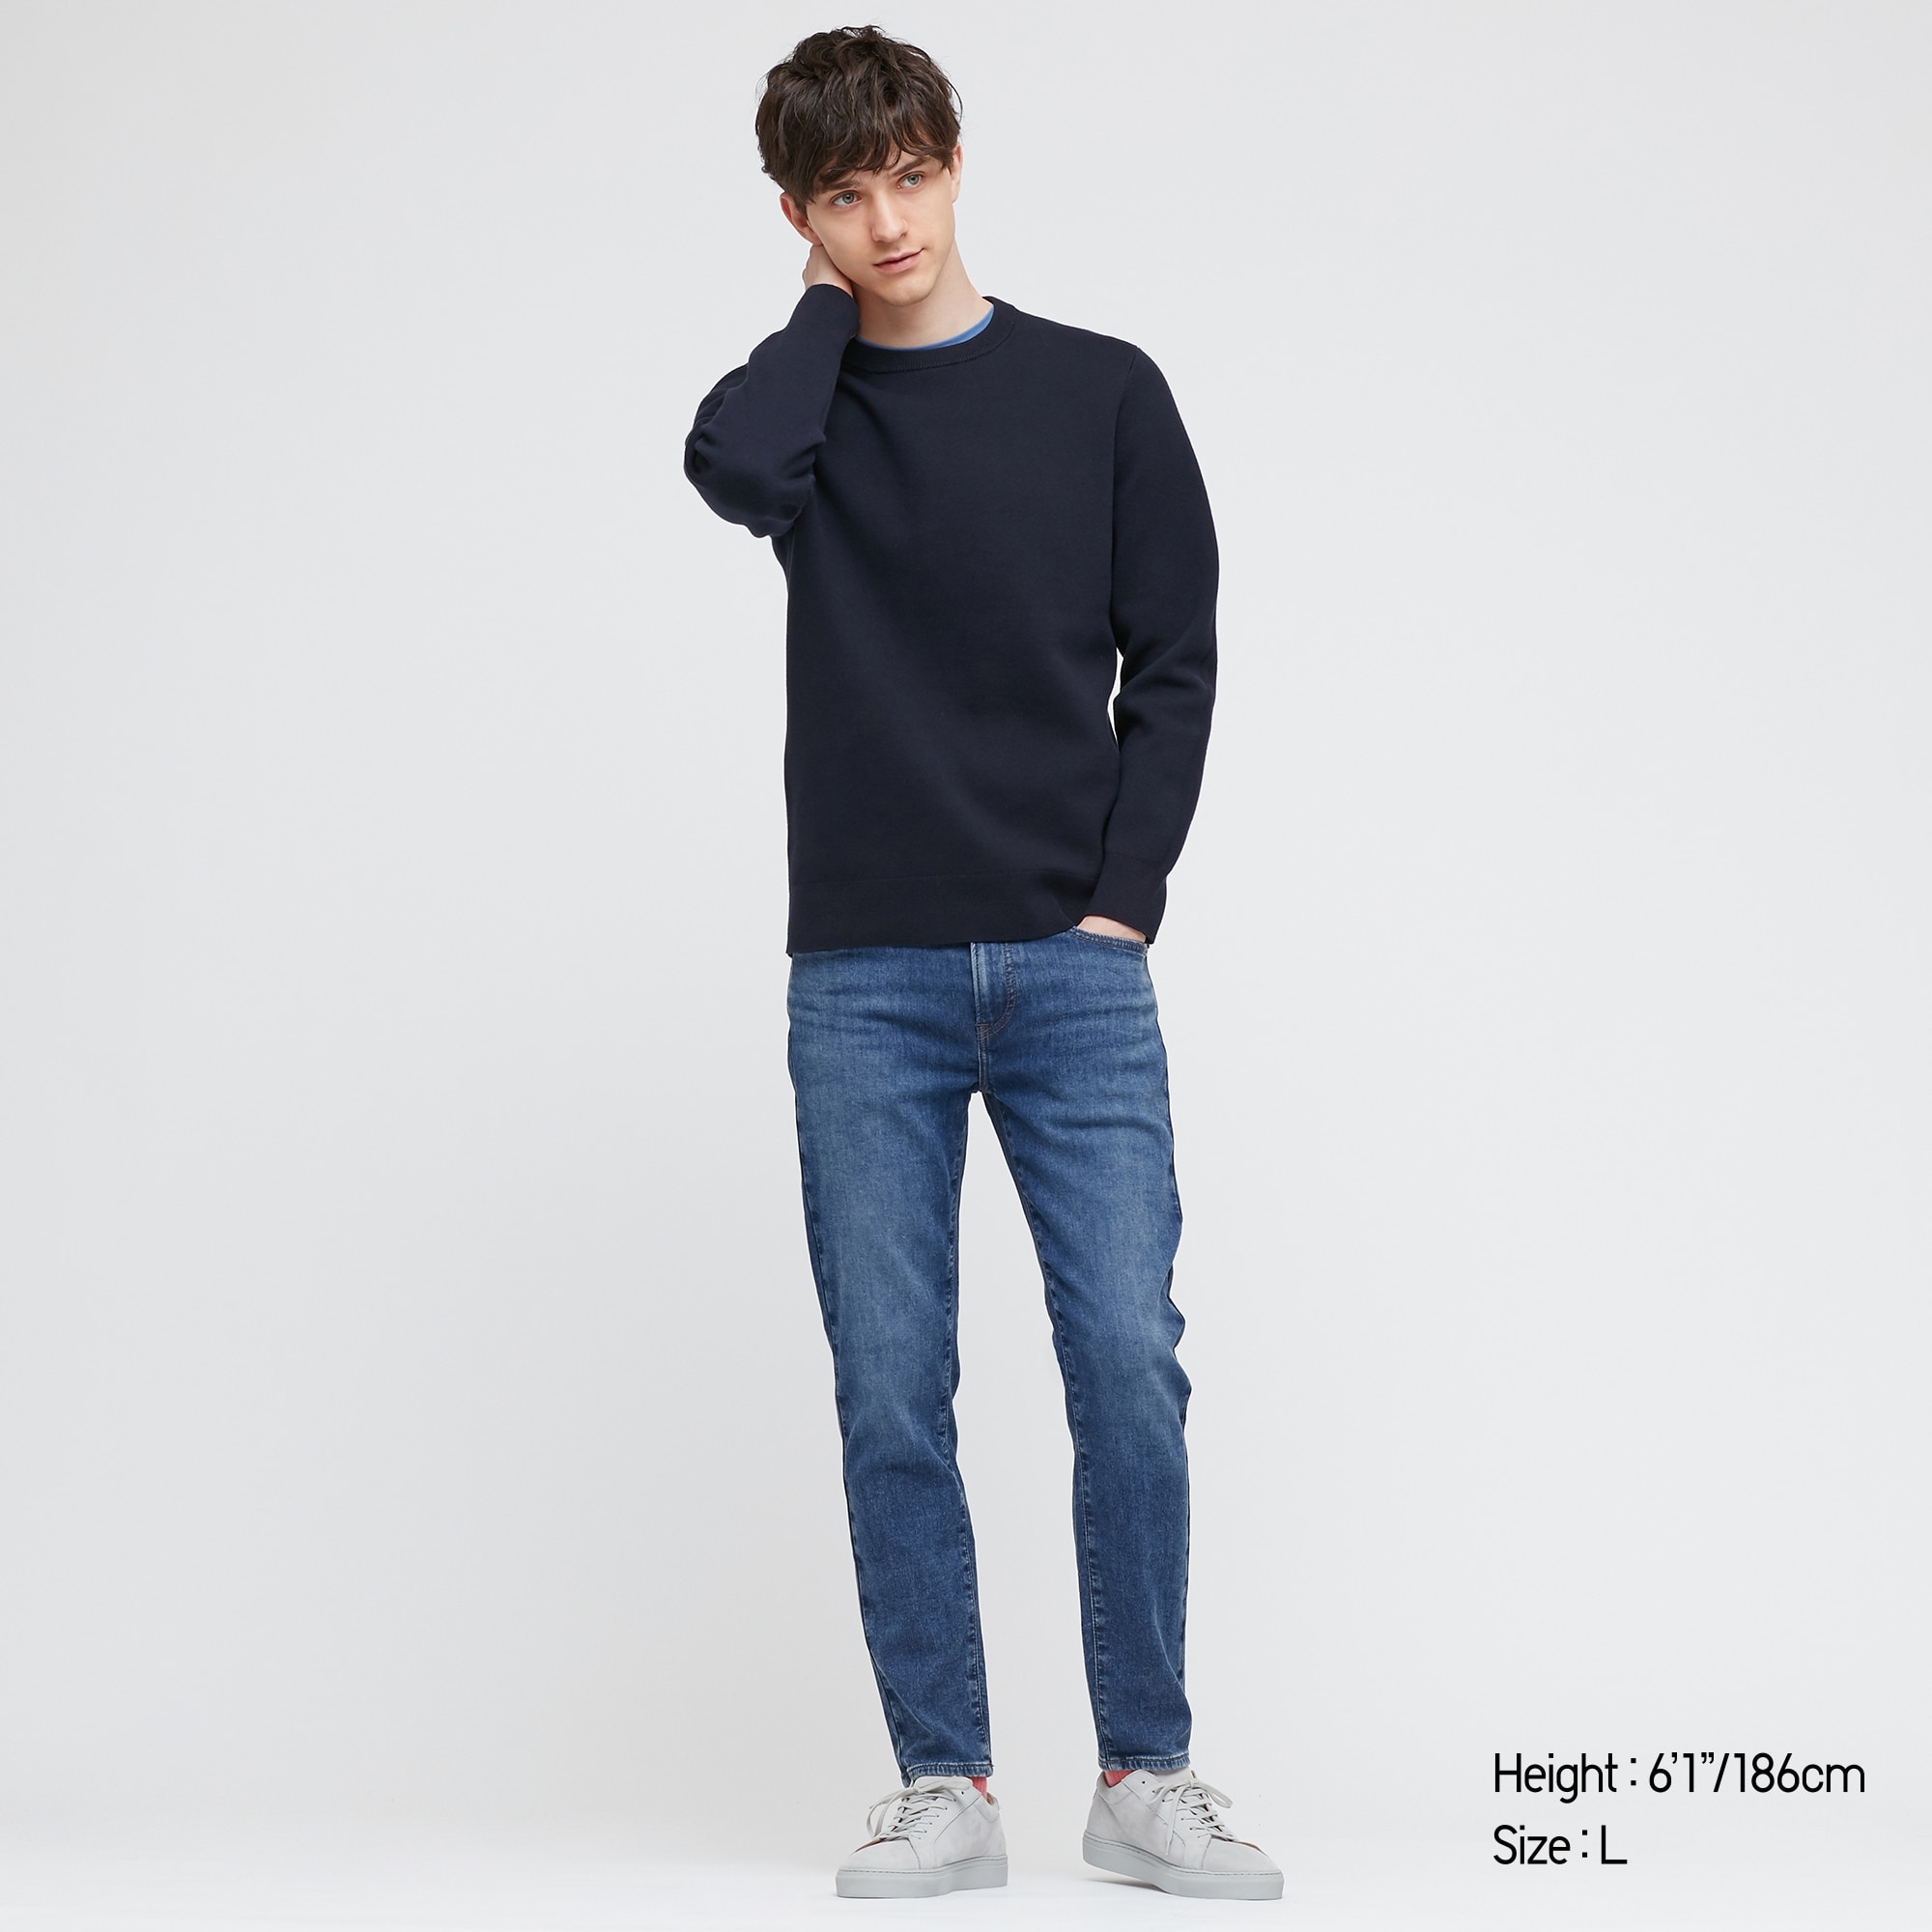 uniqlo ezy jeans skinny fit